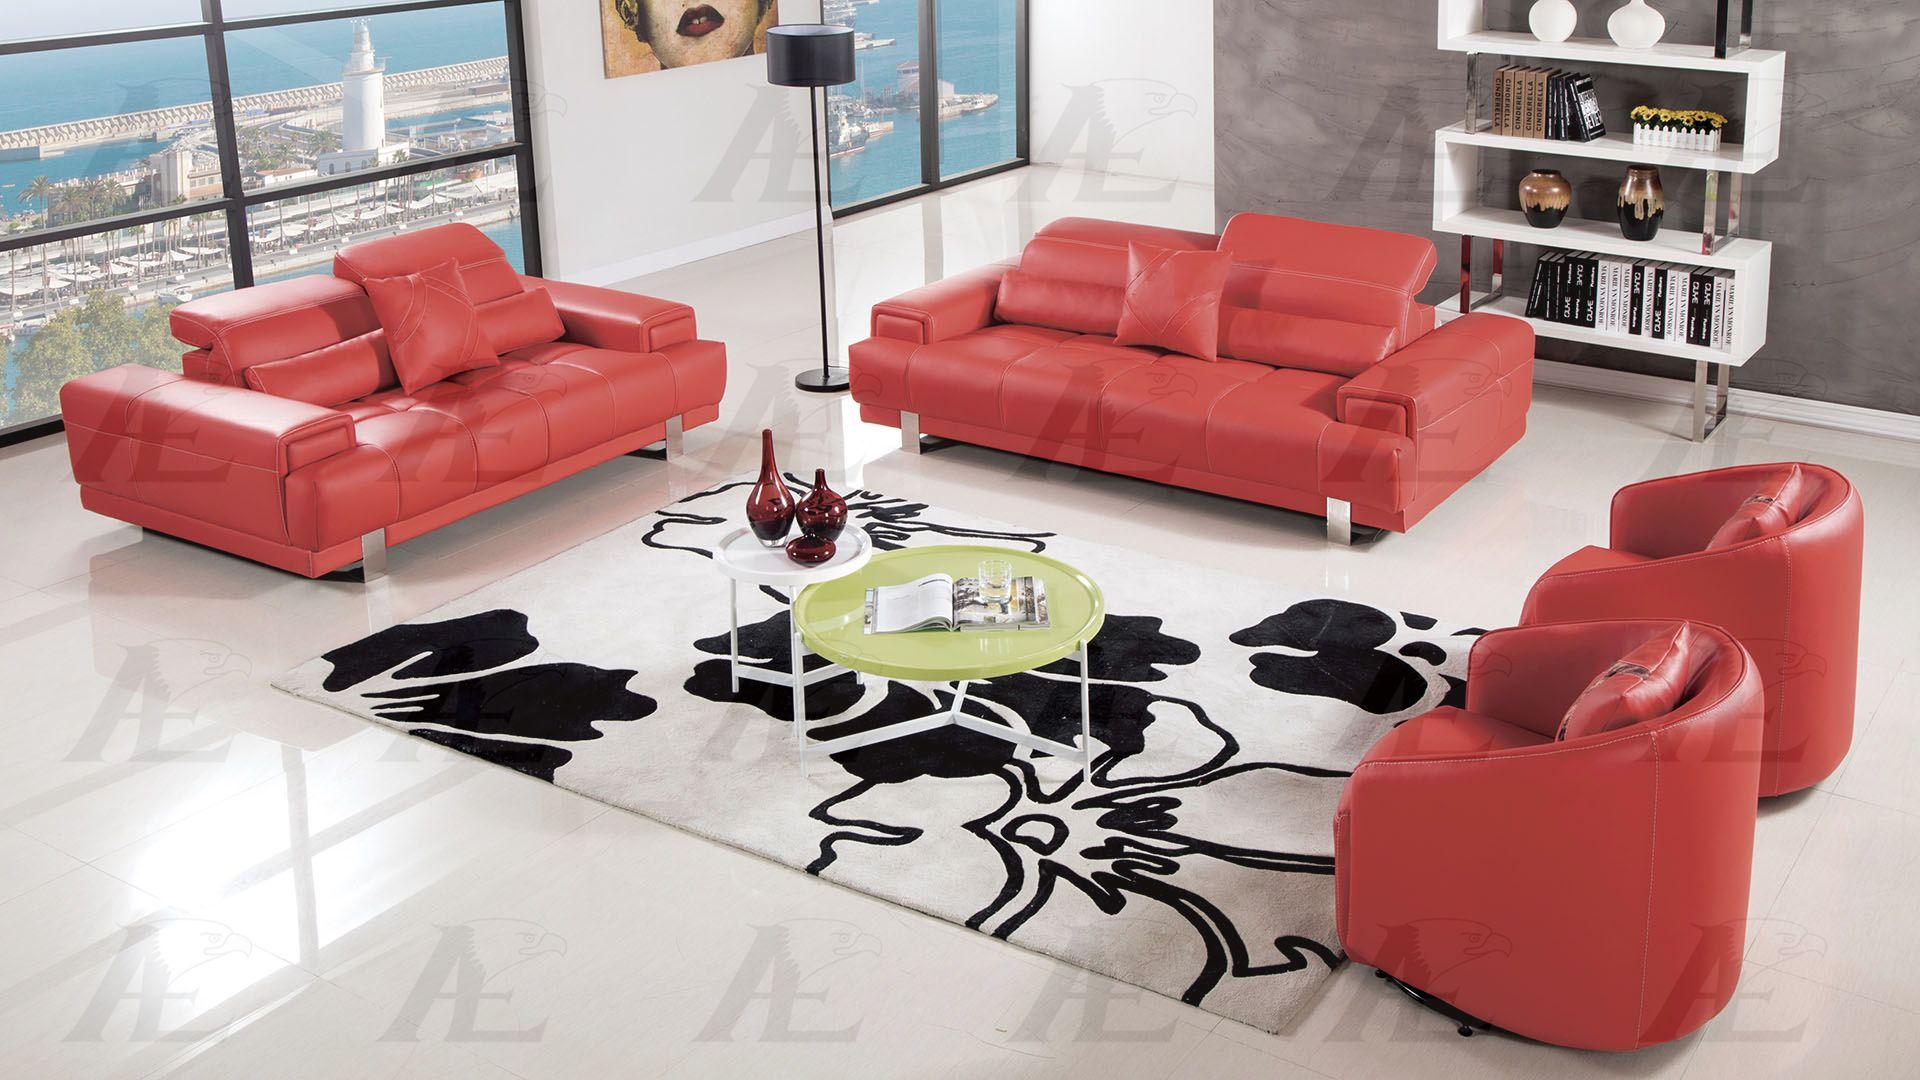 

    
American Eagle Furniture AE606-RED  Sofa Loveseat and 2 Chair Faux Leather Set 4Pcs Modern
